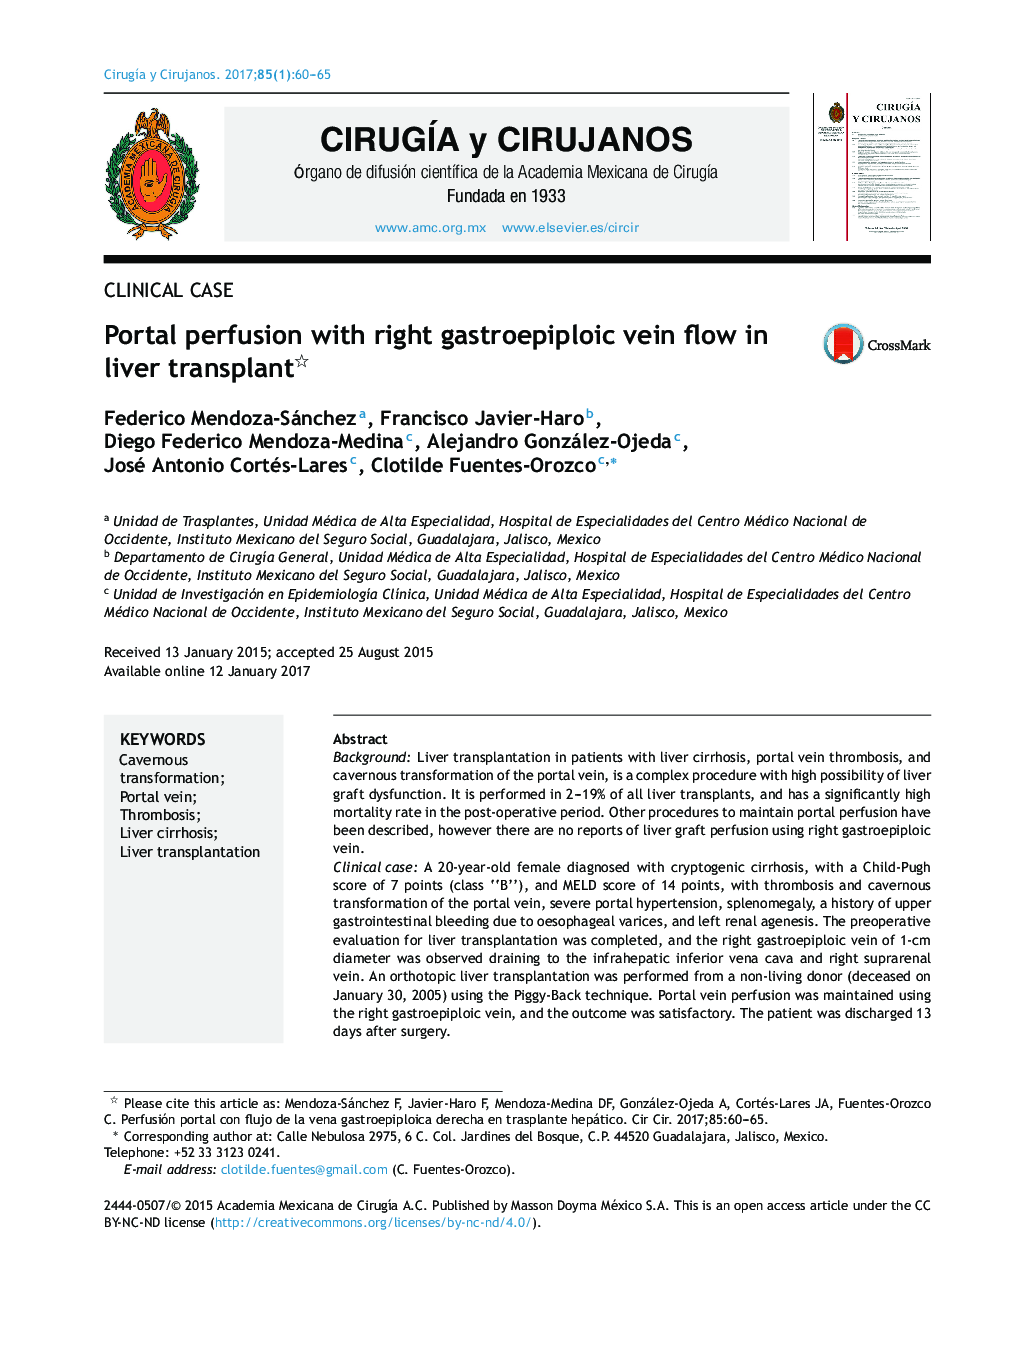 Portal perfusion with right gastroepiploic vein flow in liver transplant